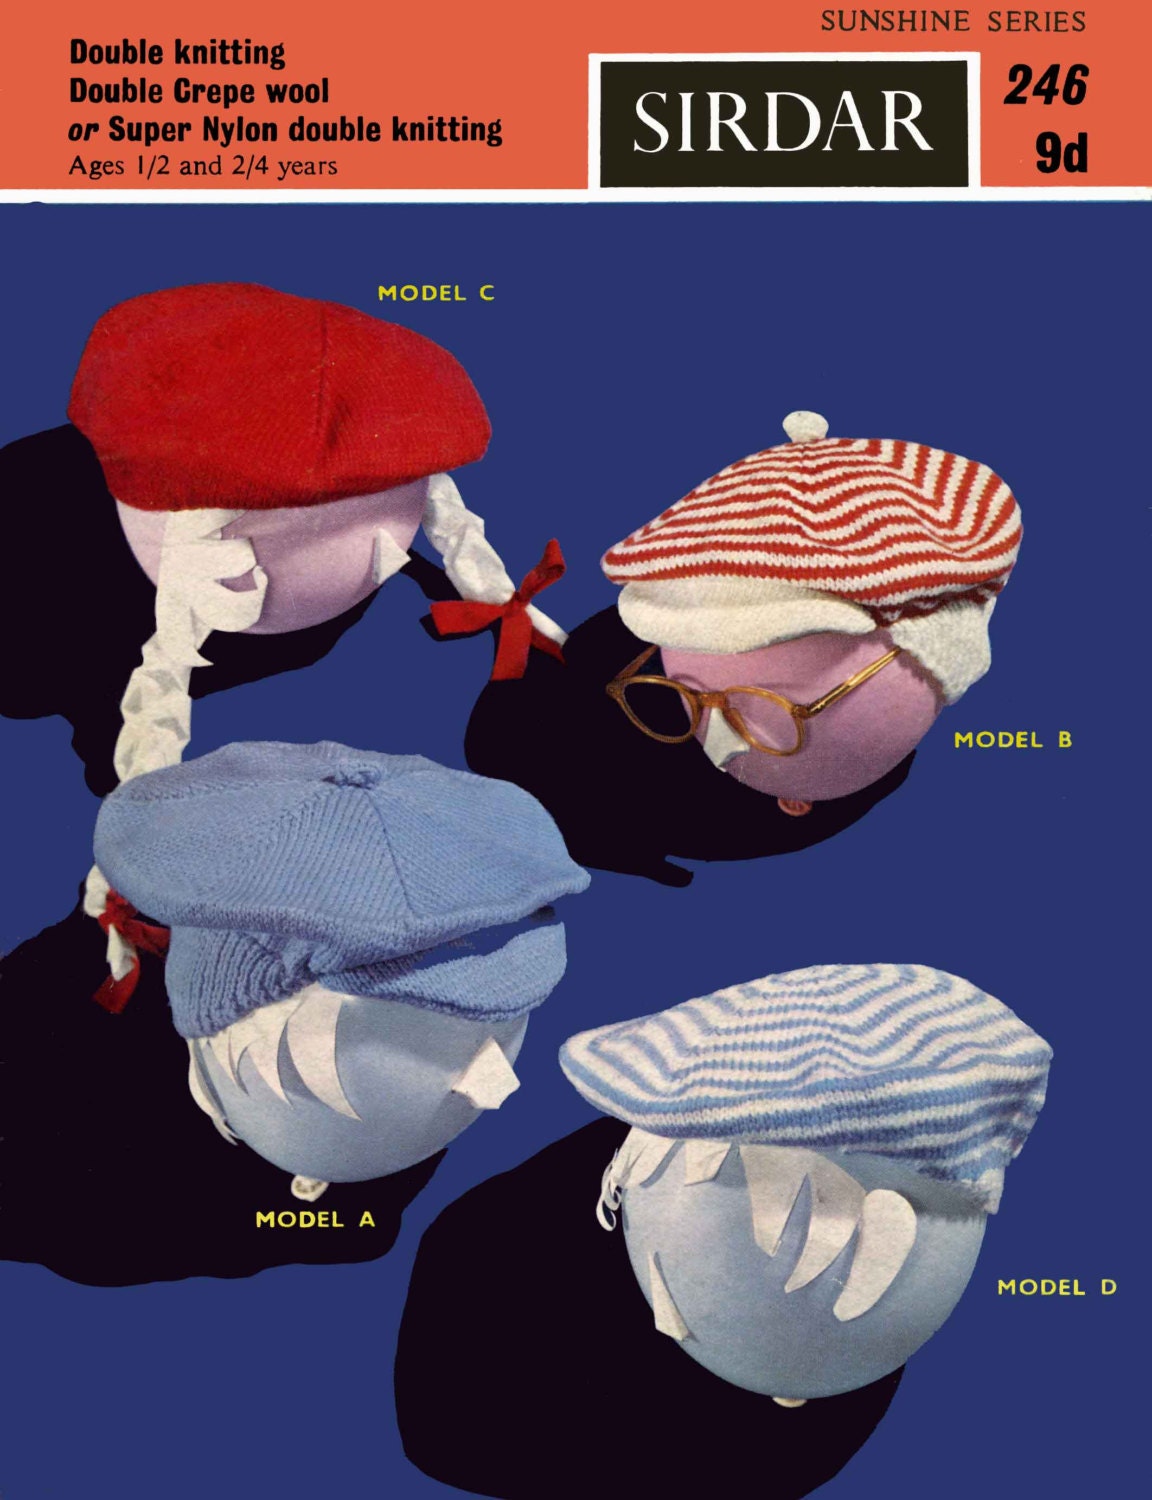 Childrens Flat Caps / Hats in Four Styles, 1/2 & 2/4 years, DK, 60s Knitting Pattern, Sirdar 246